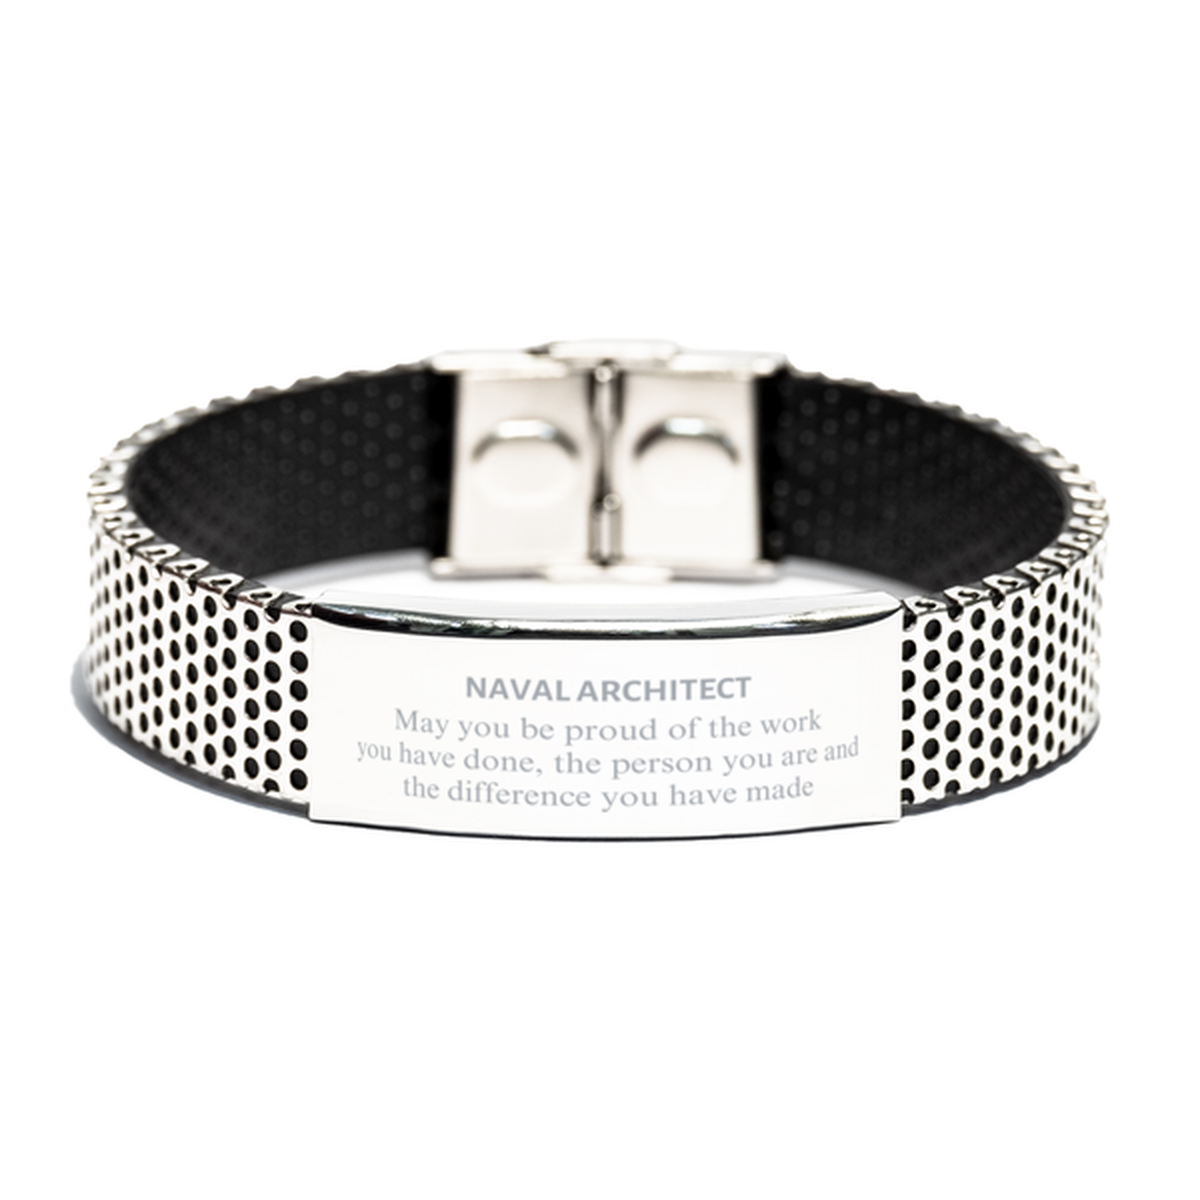 Naval Architect May you be proud of the work you have done, Retirement Naval Architect Stainless Steel Bracelet for Colleague Appreciation Gifts Amazing for Naval Architect